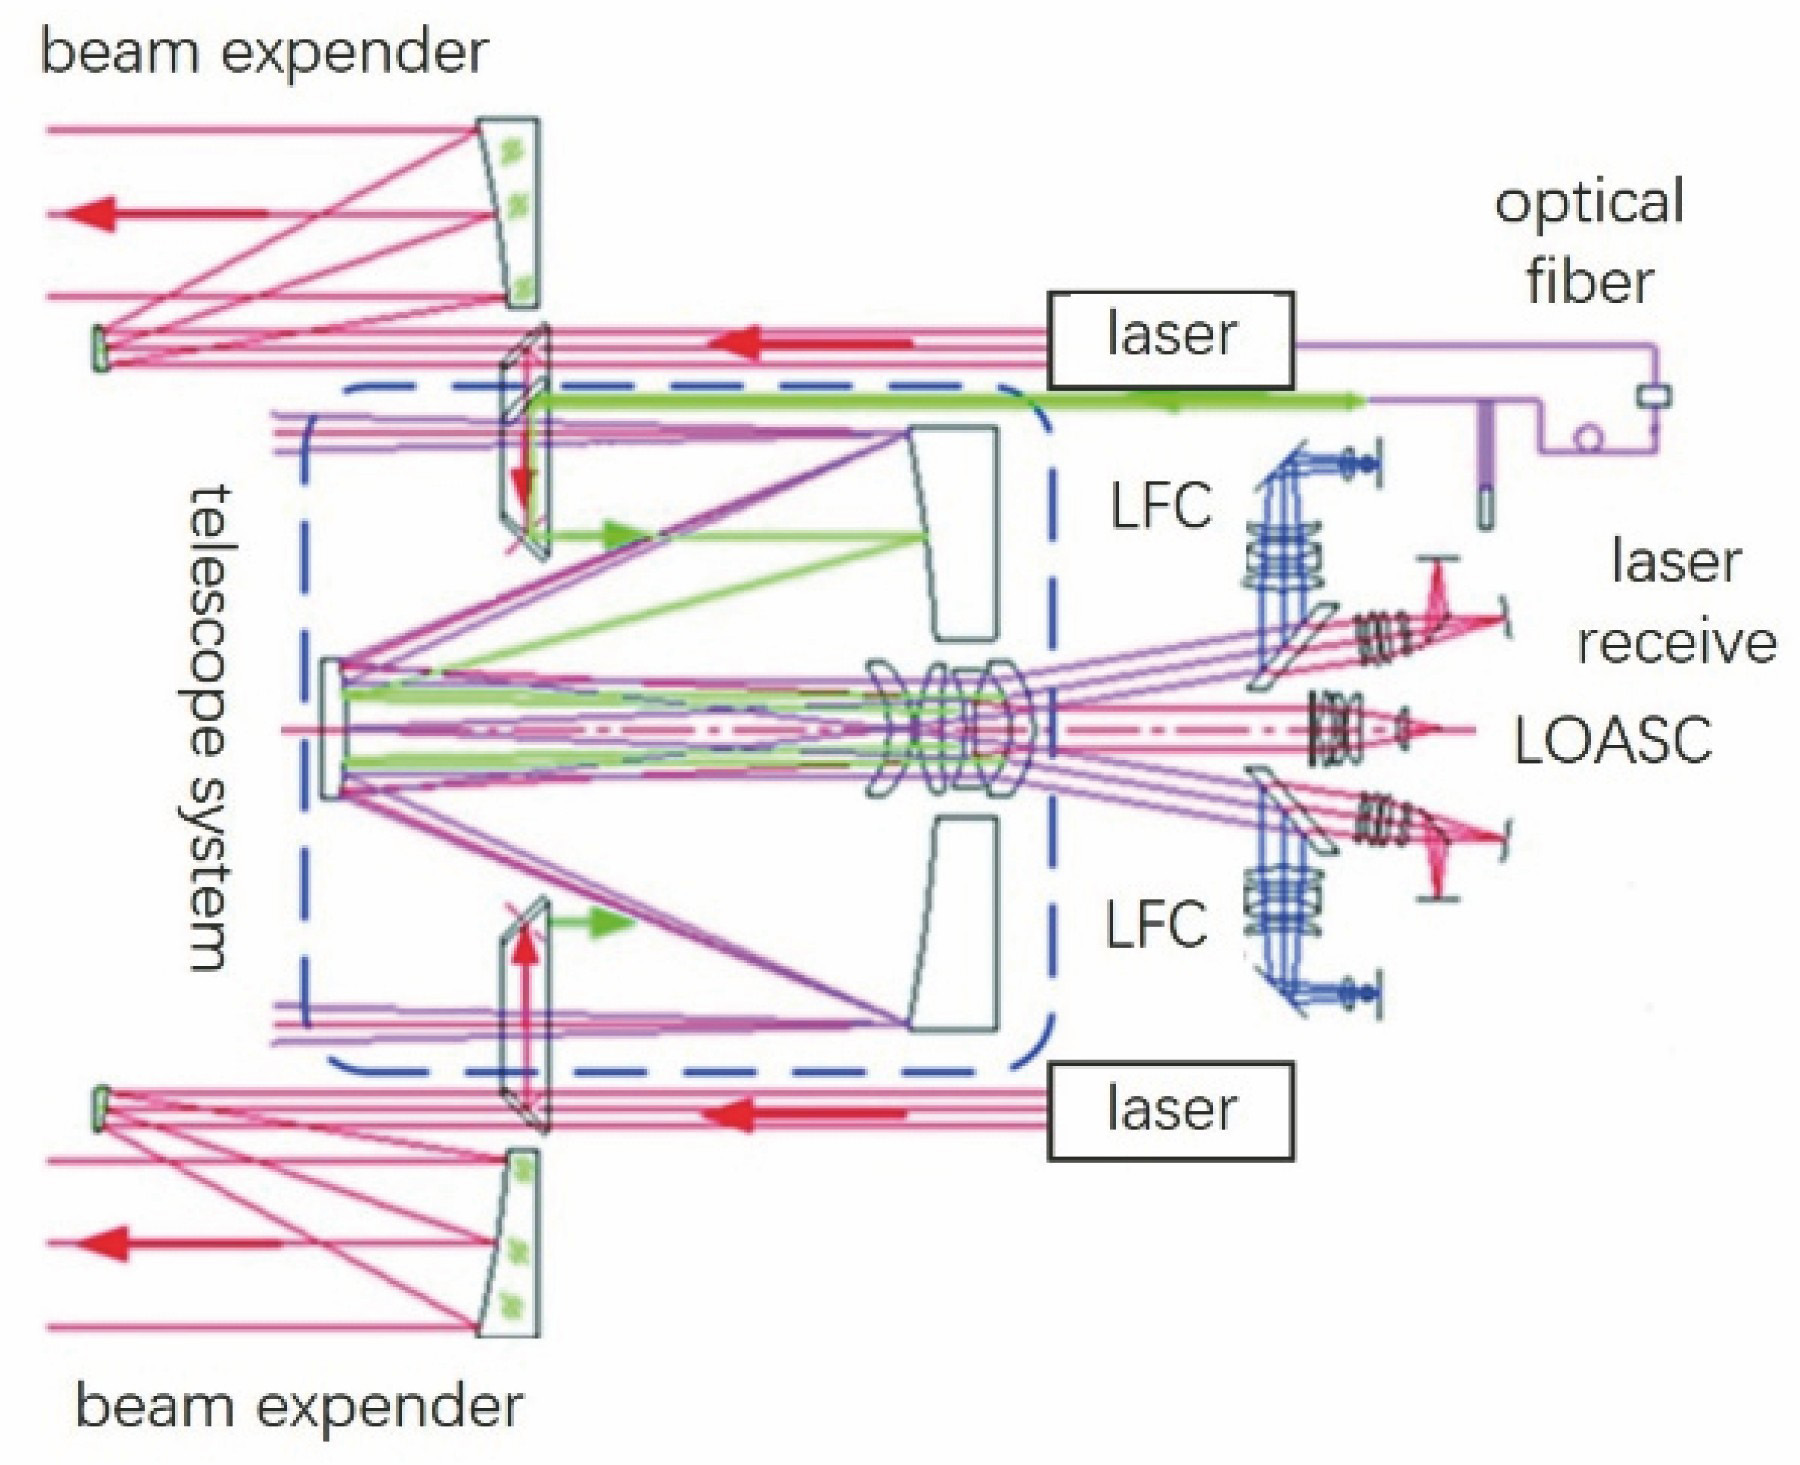 Block diagram of laser emission and monitoring system[10]